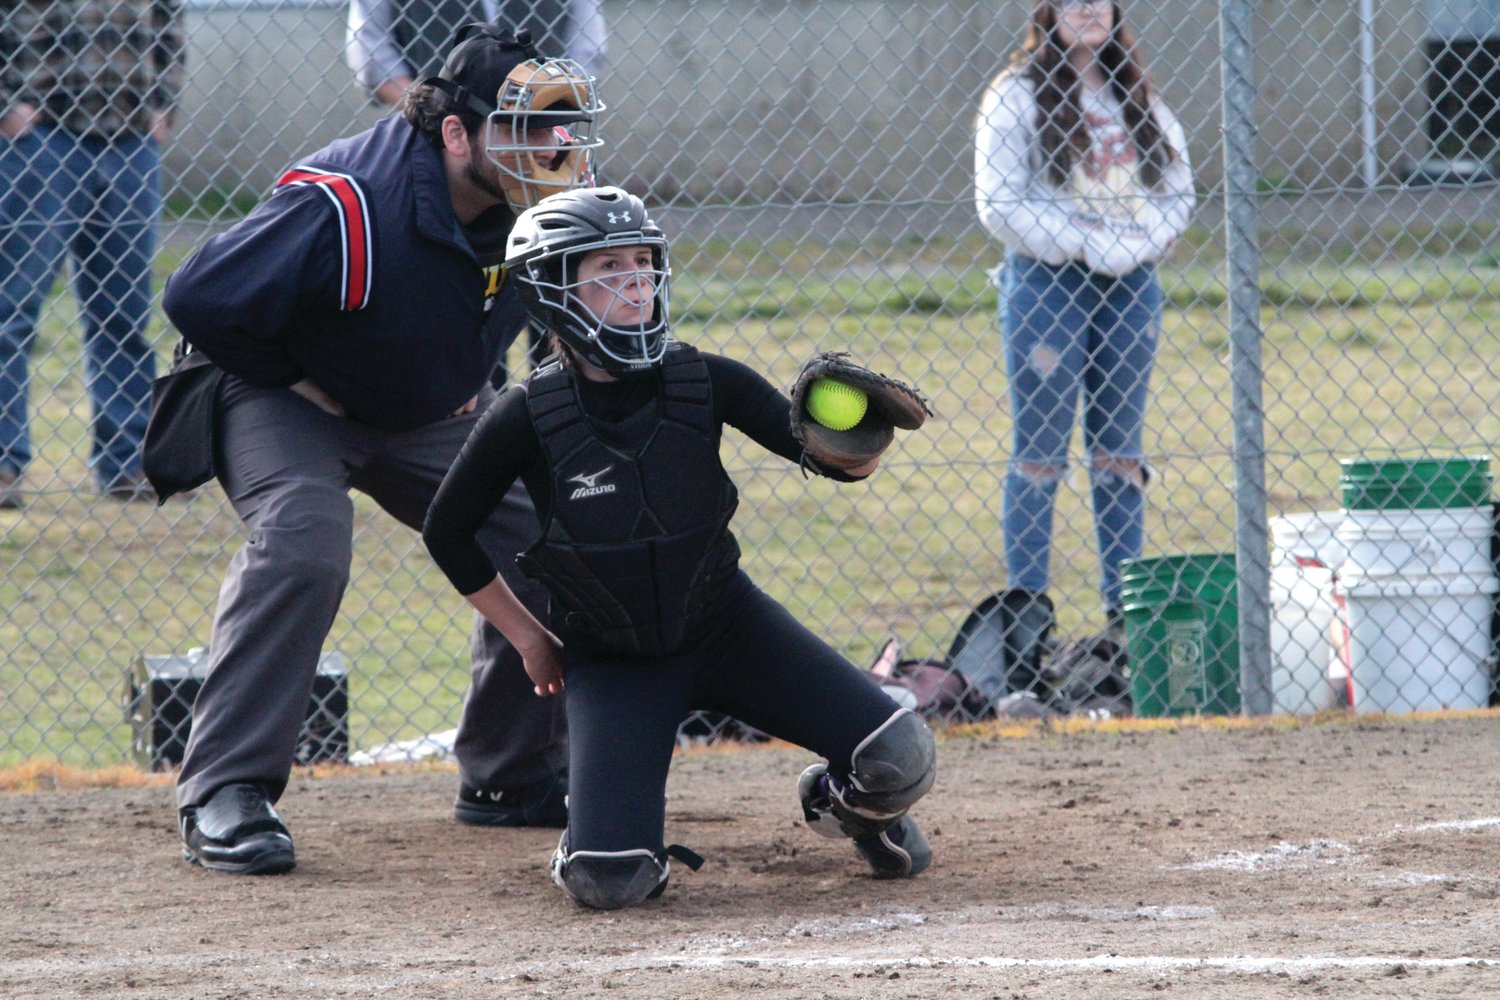 Stormie Elkins keeps an eye on the runner at first base during Quilcene’s fastpitch softball game last week against Darrington. Leader photo by Brian Kelly